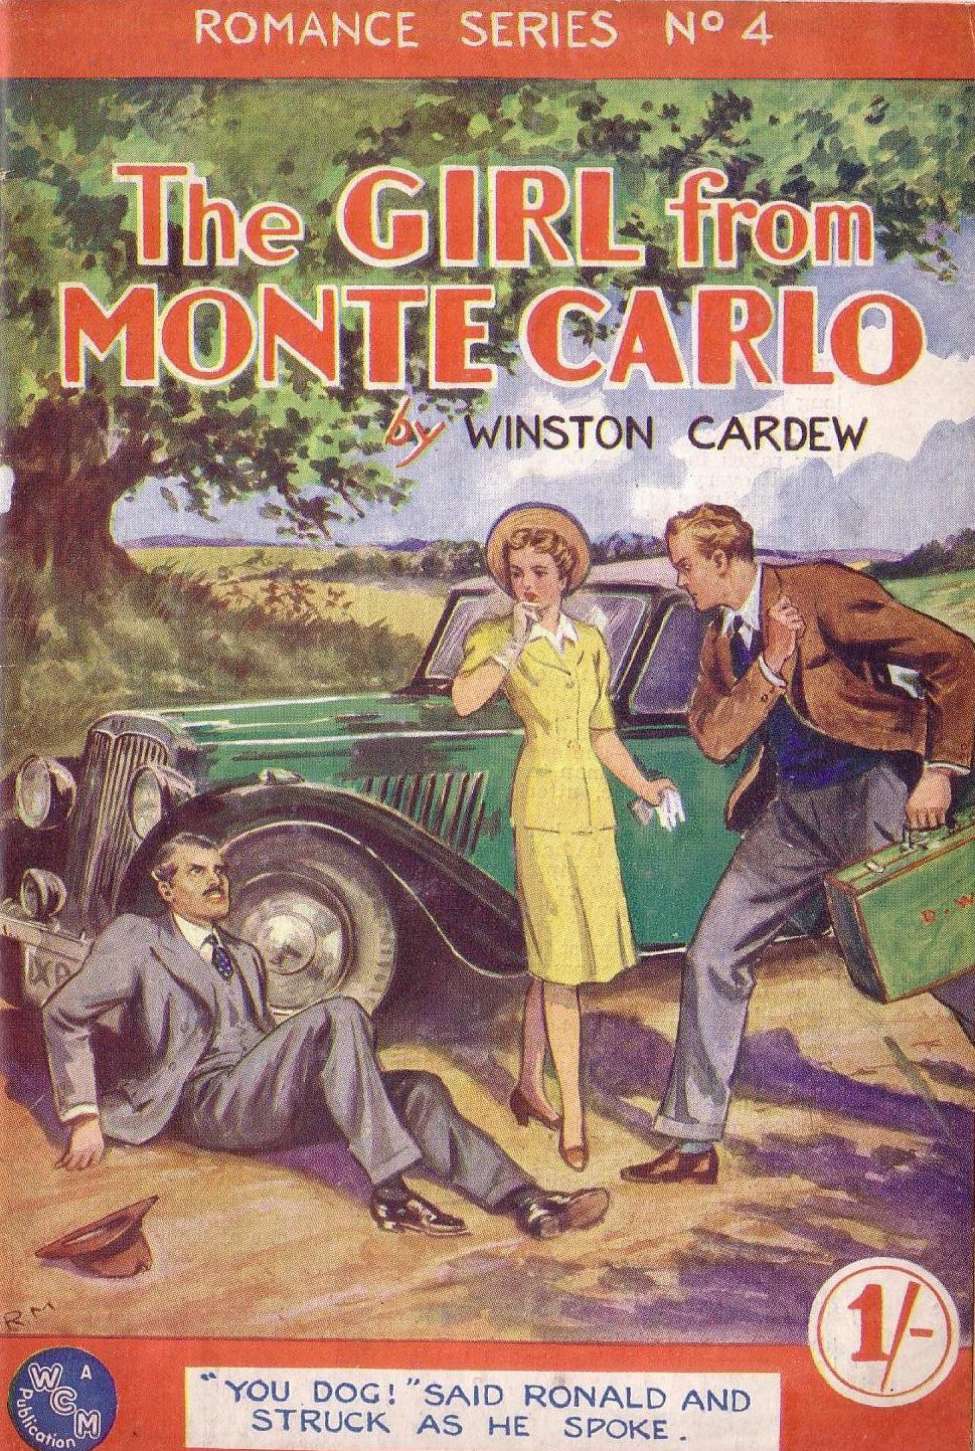 Book Cover For Romance Series 4 The Girl From Monte Carlo